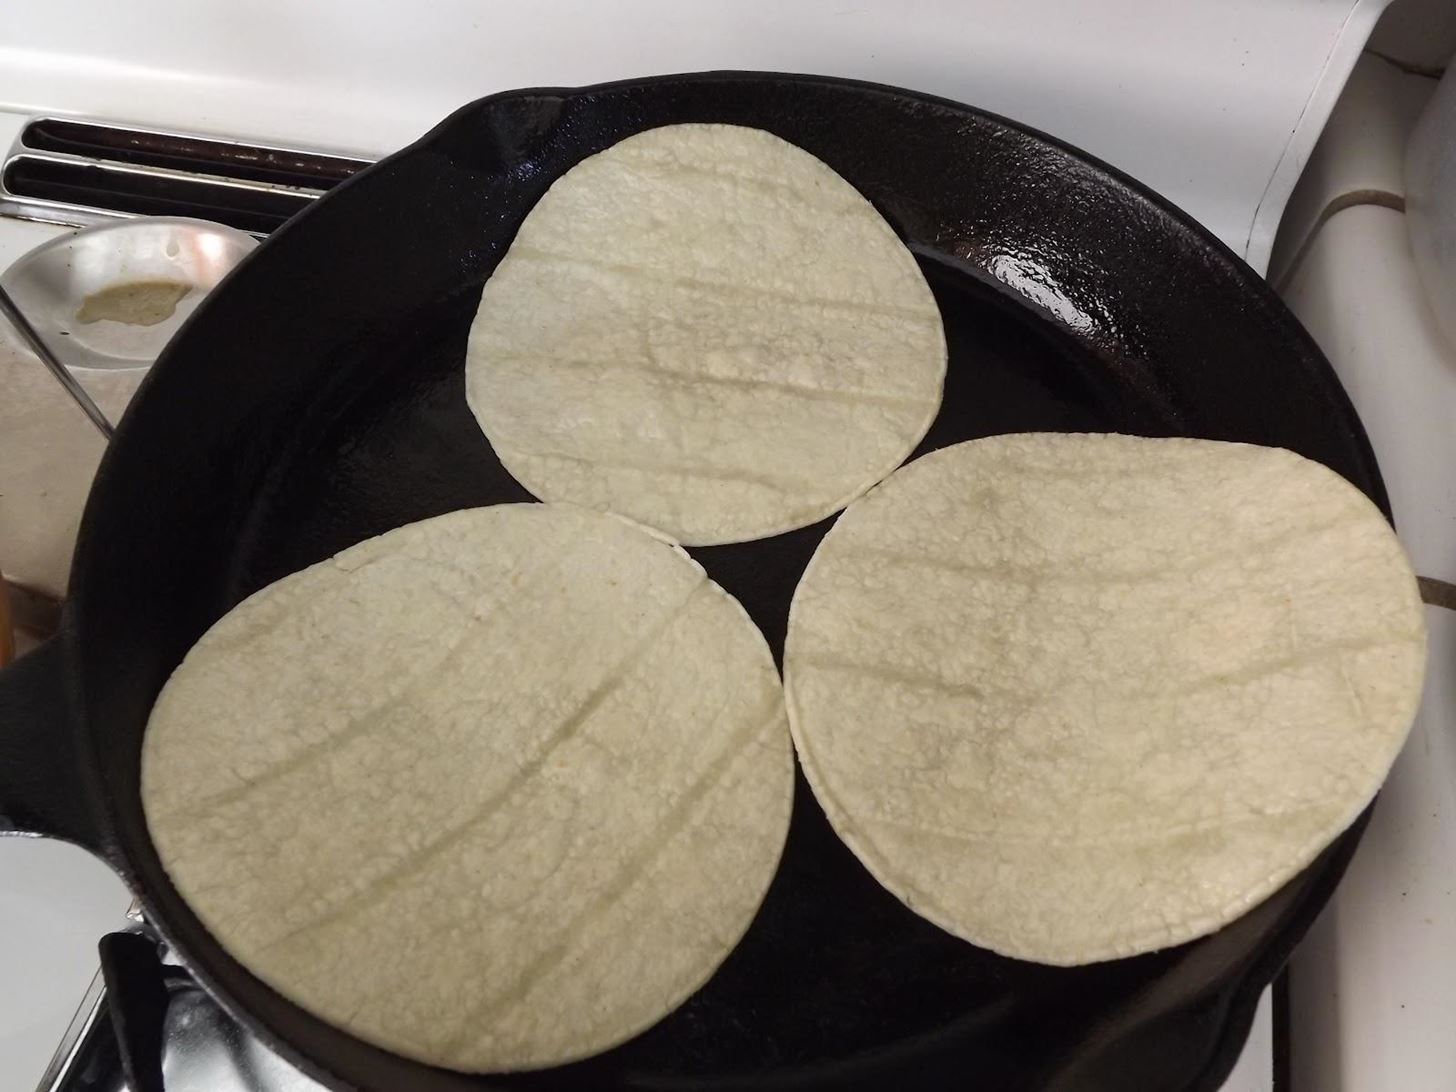 Why You Need to Heat Up Store-Bought Tortillas (And the Best Ways to Do It)